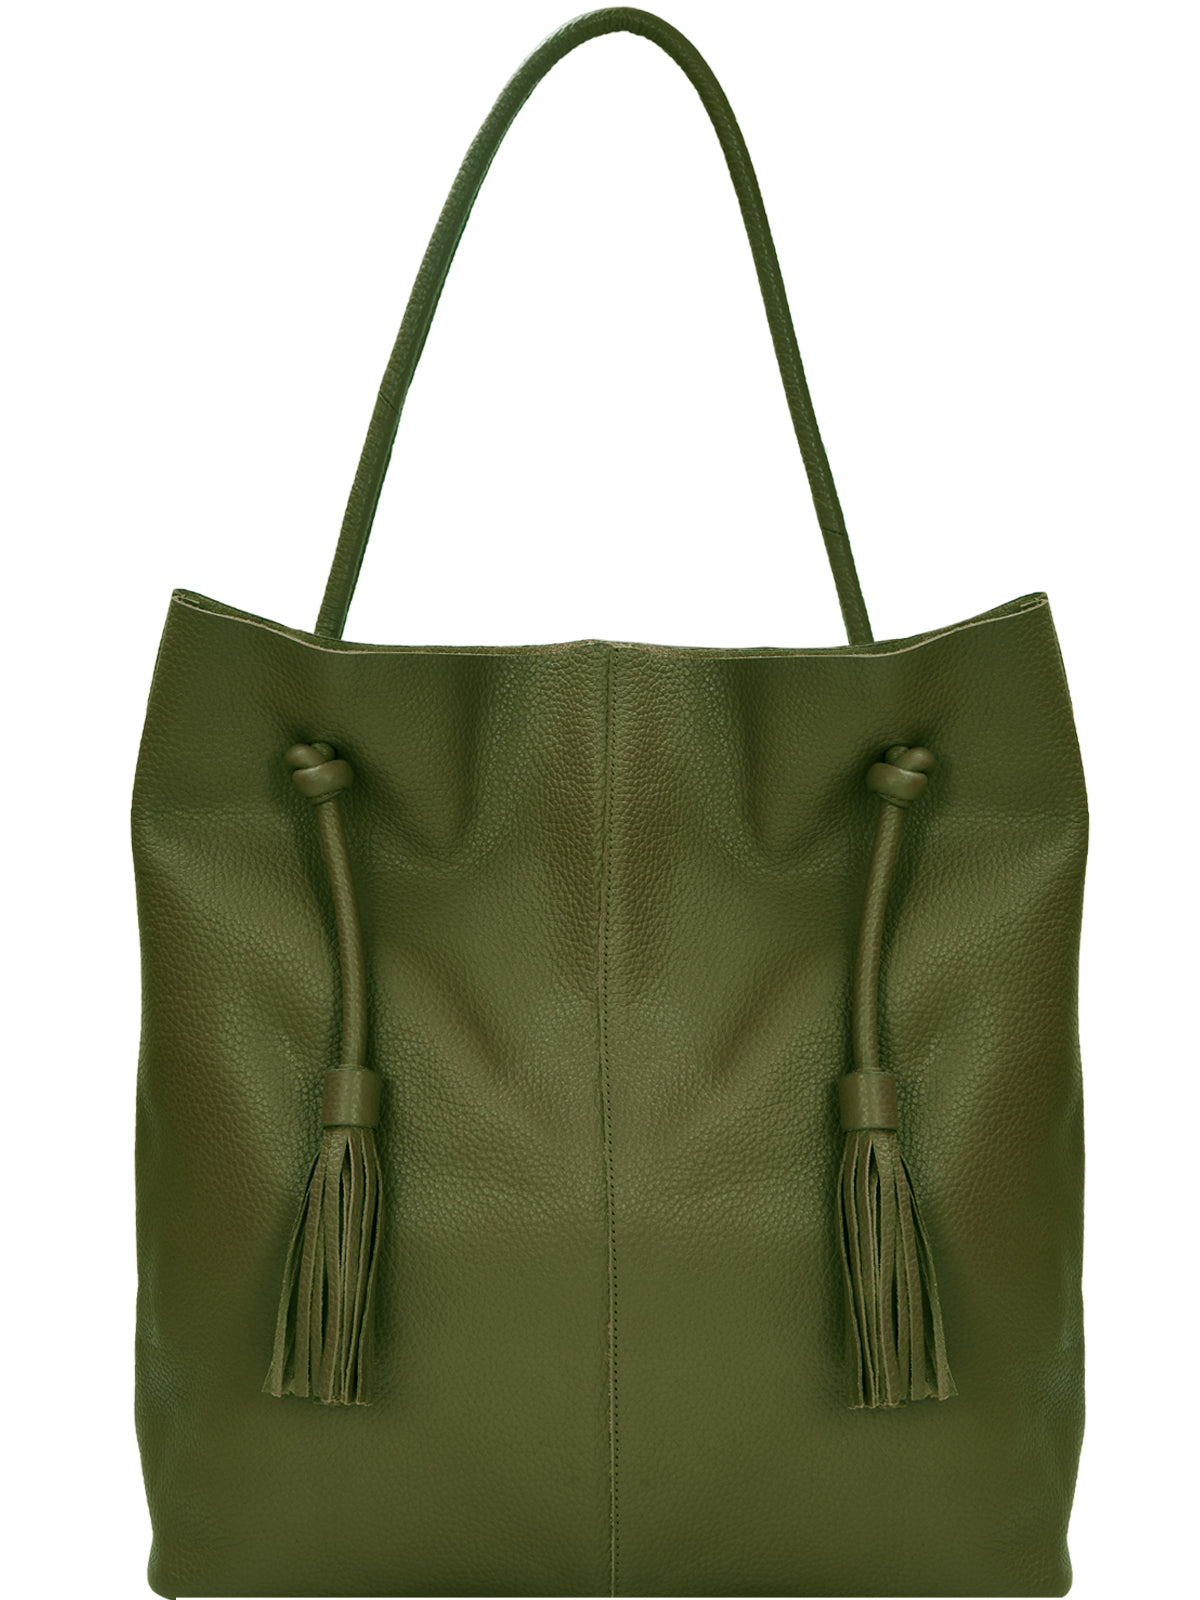 Olive Green Drawcord Leather Hobo Shoulder Bag Brix Bailey Ethical Sustainable Brand